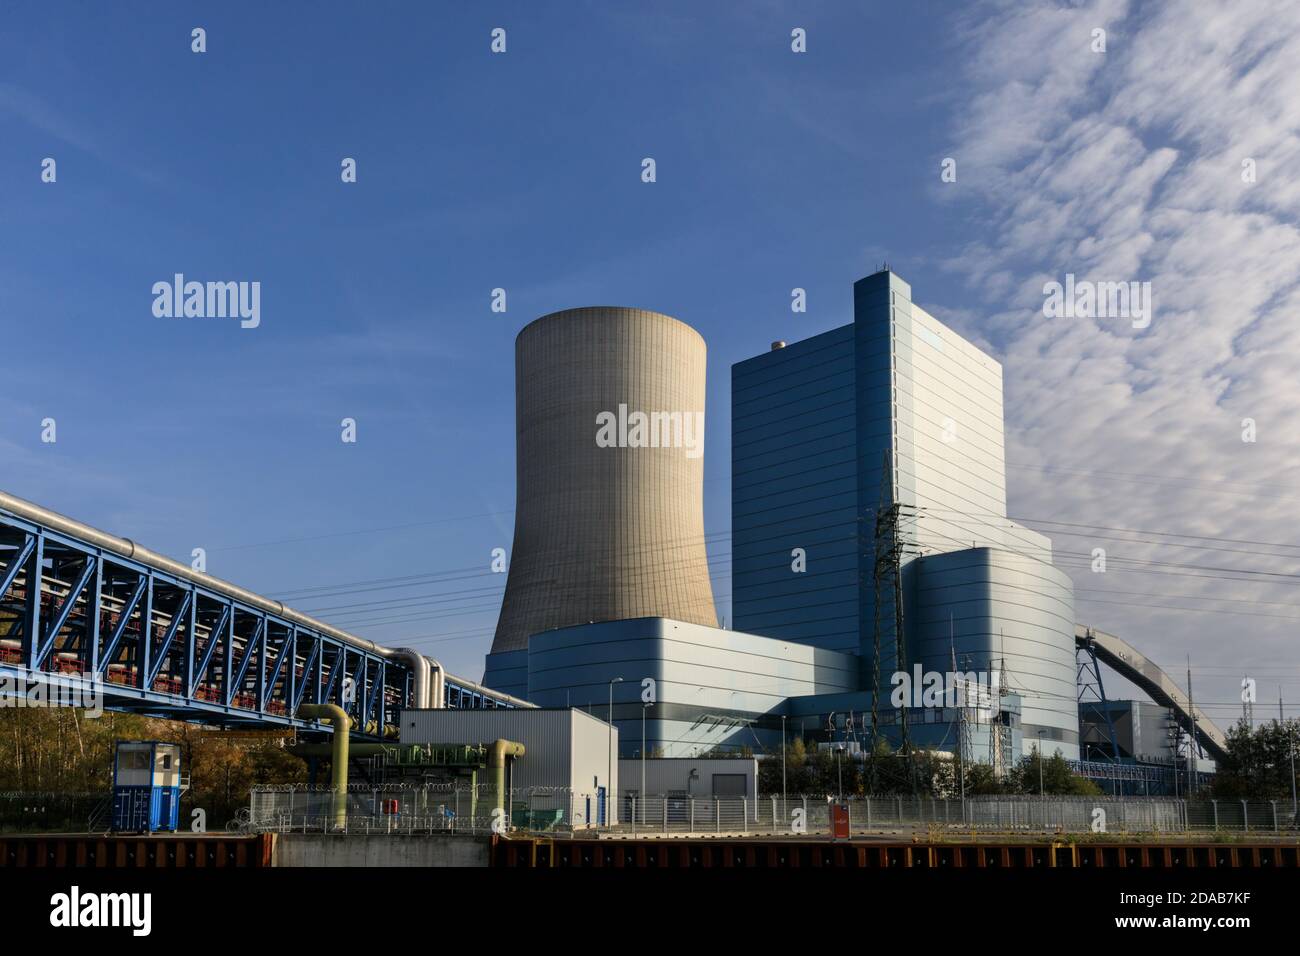 Datteln 4 power plant, last coal-fired power plant to be built, opened 2020, Datteln, NRW, Germany Stock Photo